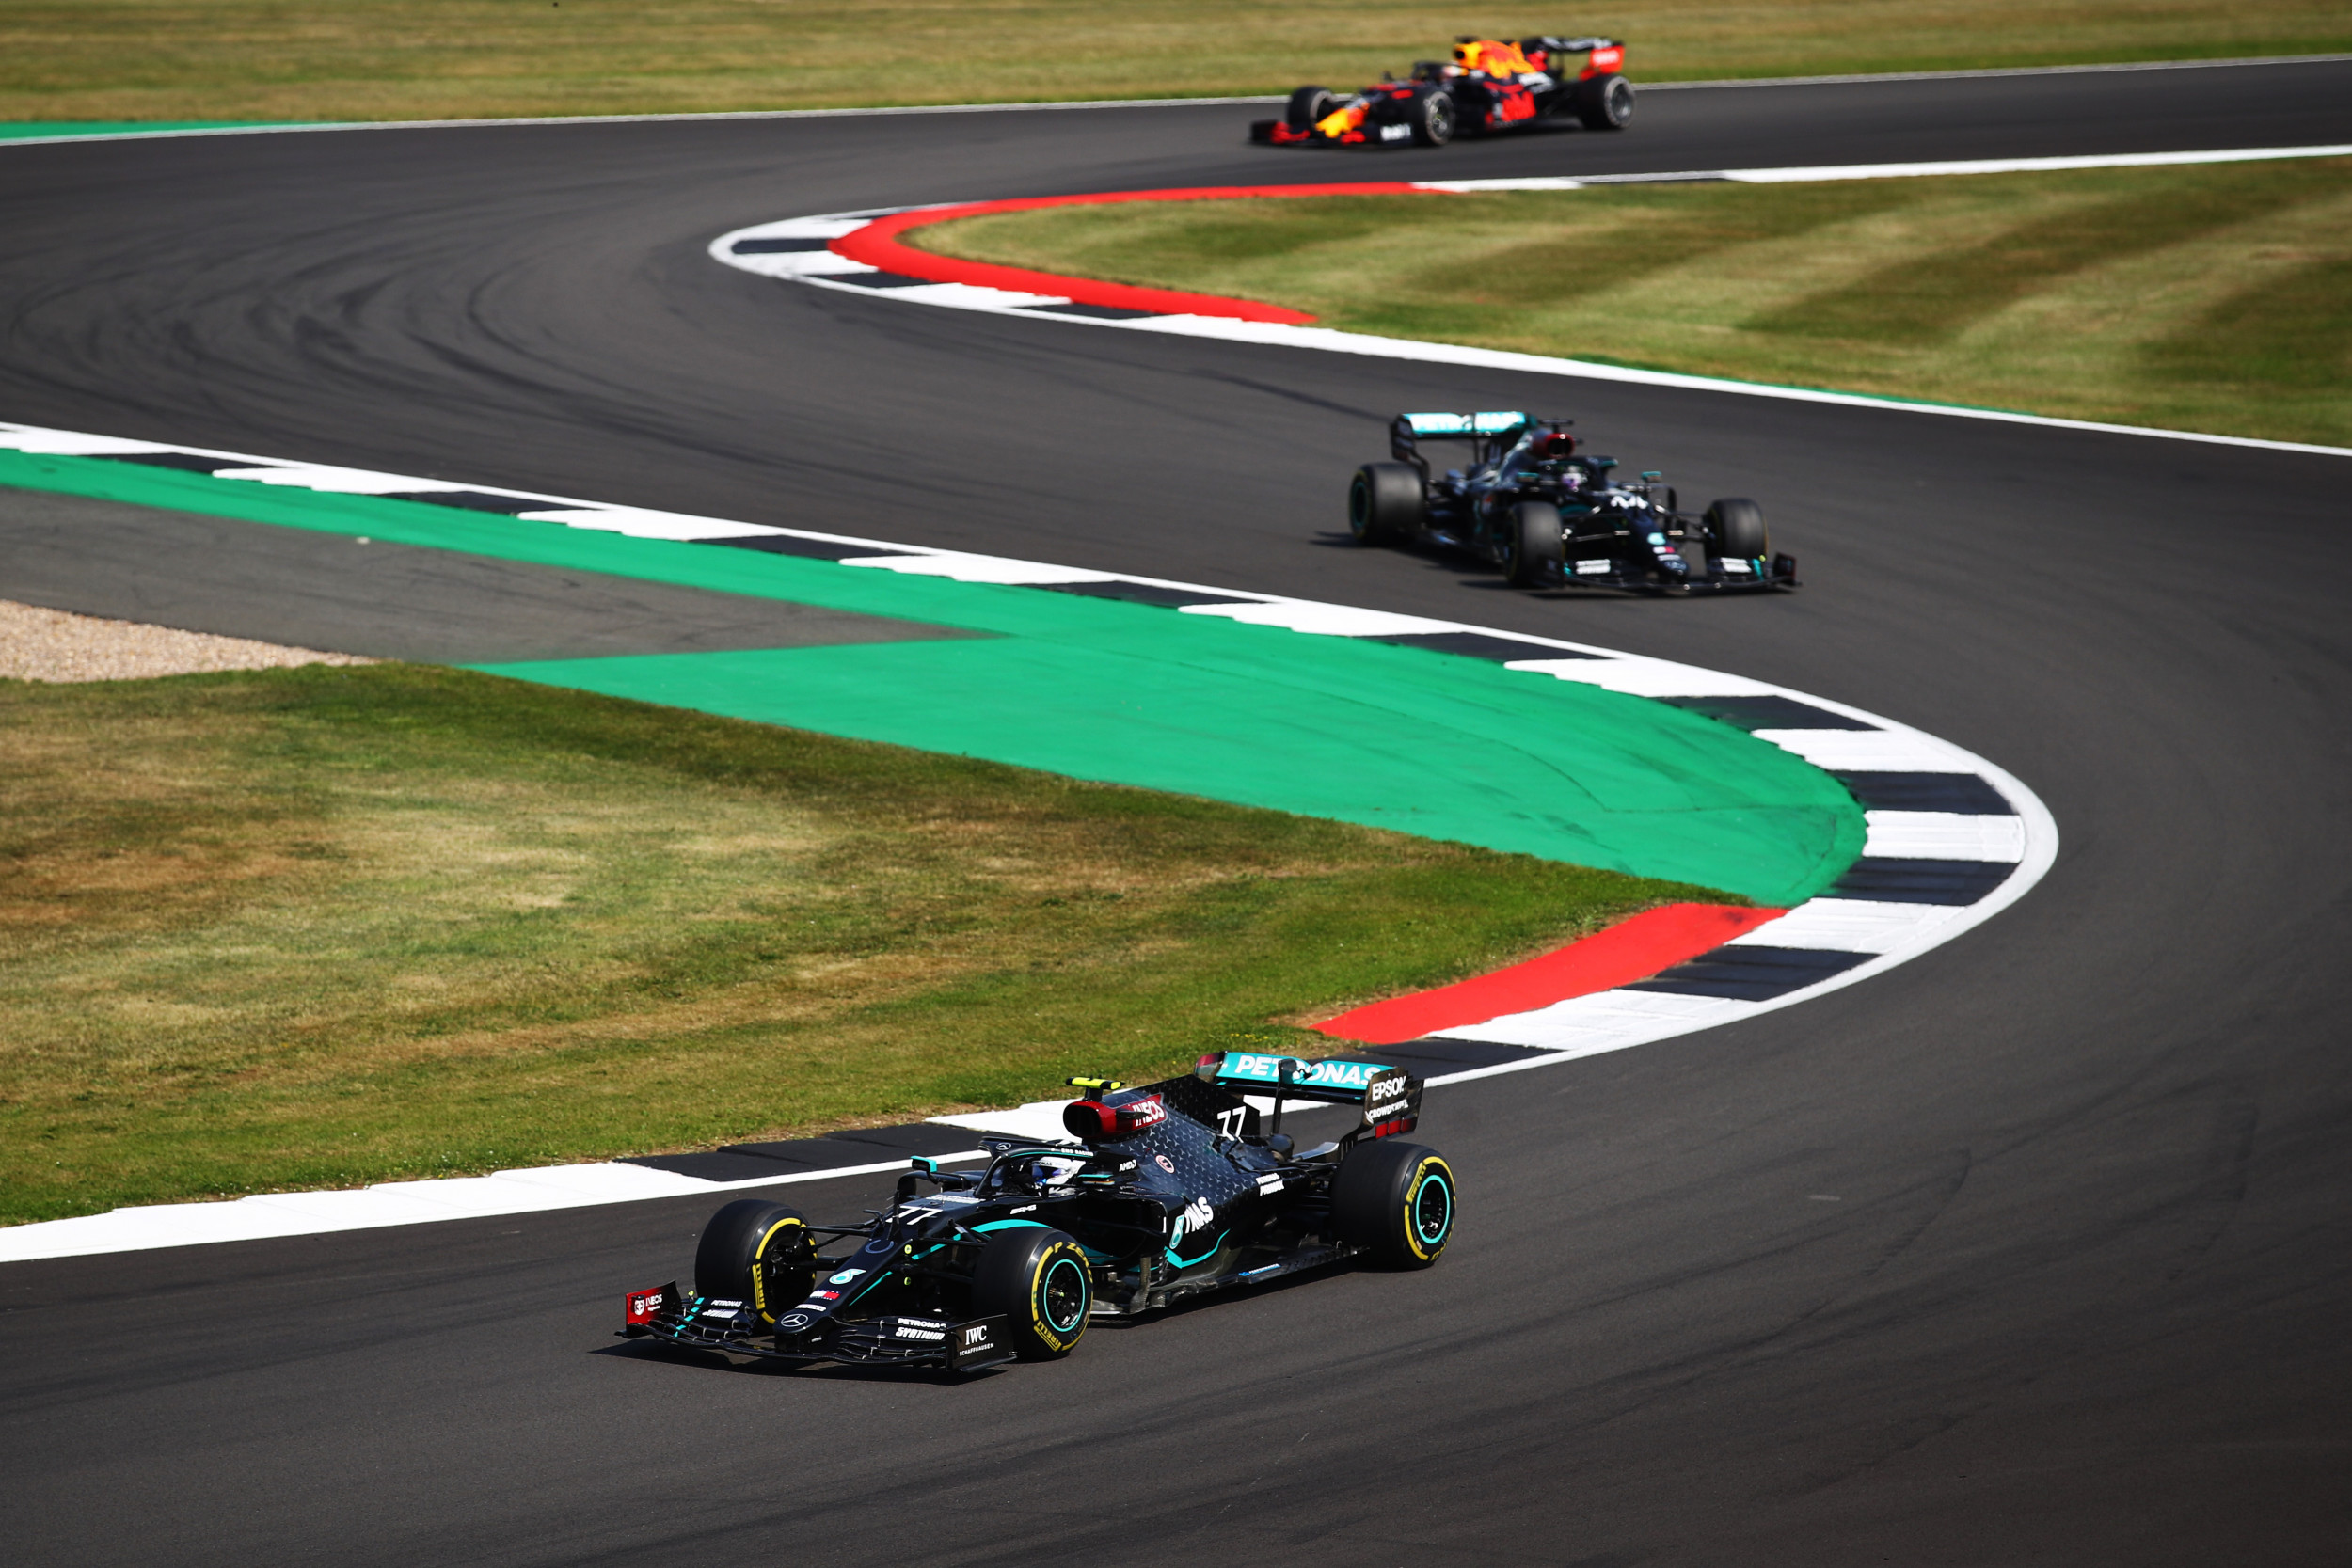 10 Things You Need to Know About Formula 1 Before the US Grand Prix on Sunday